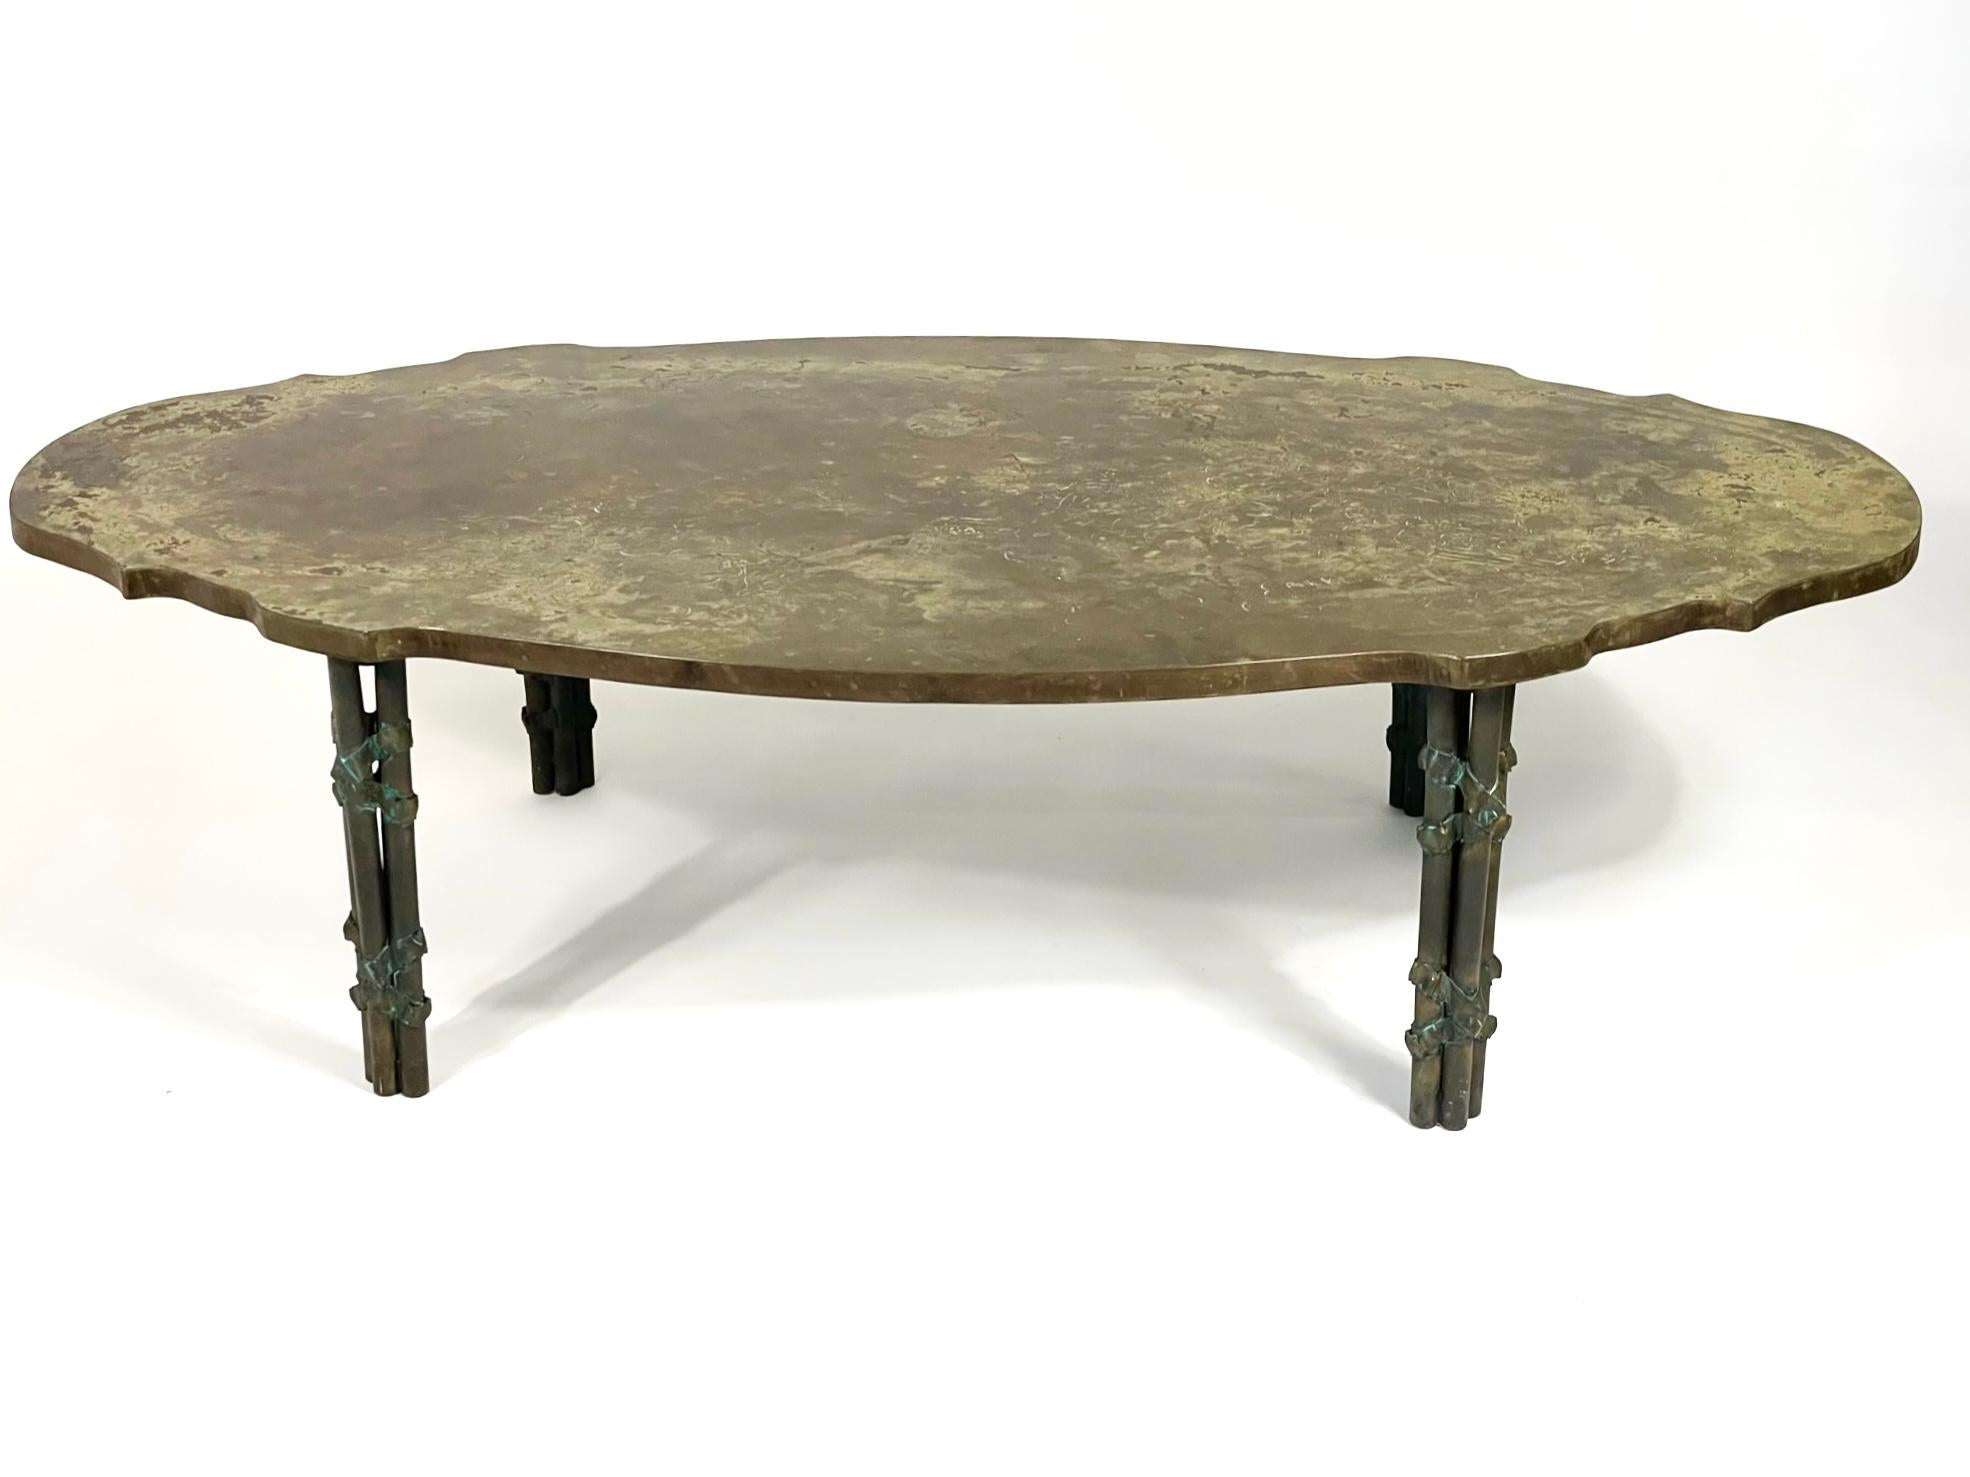 This Boucher Coffee Table was designed by Philip and Kelvin Laverne in the 1960s. According to the catalog it is comprised of three separate bronzes inlaid by hand to create one solid bronze background of magnificent light and dark golden brown